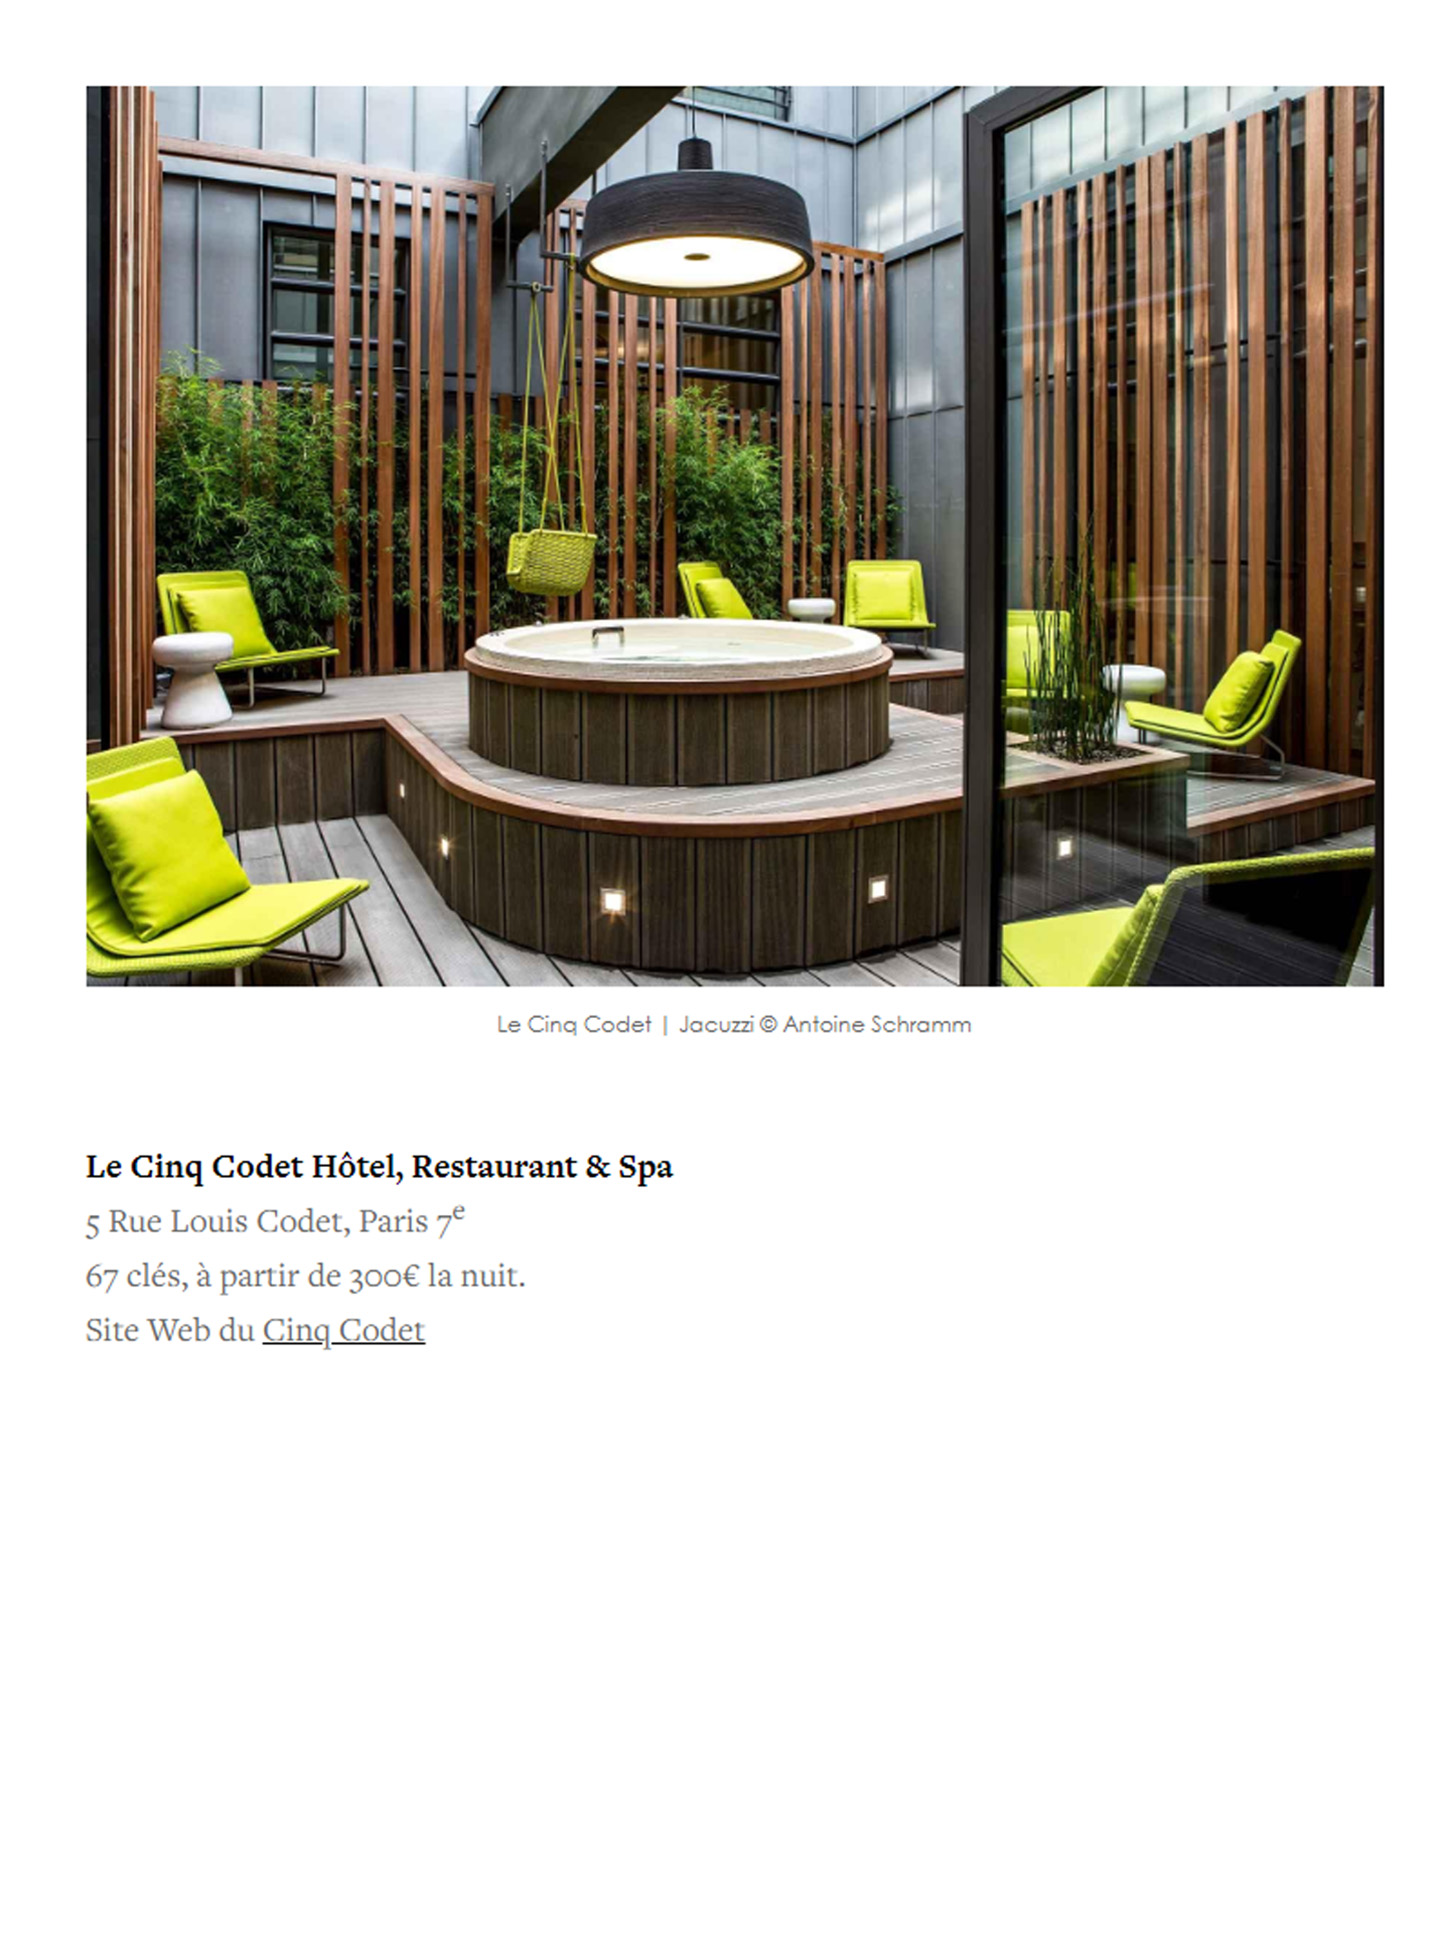 Article on the projects of the interior design studio jean-philippe nuel in the magazine yonder and on the success of the 5 star Lancaster hotel in Paris